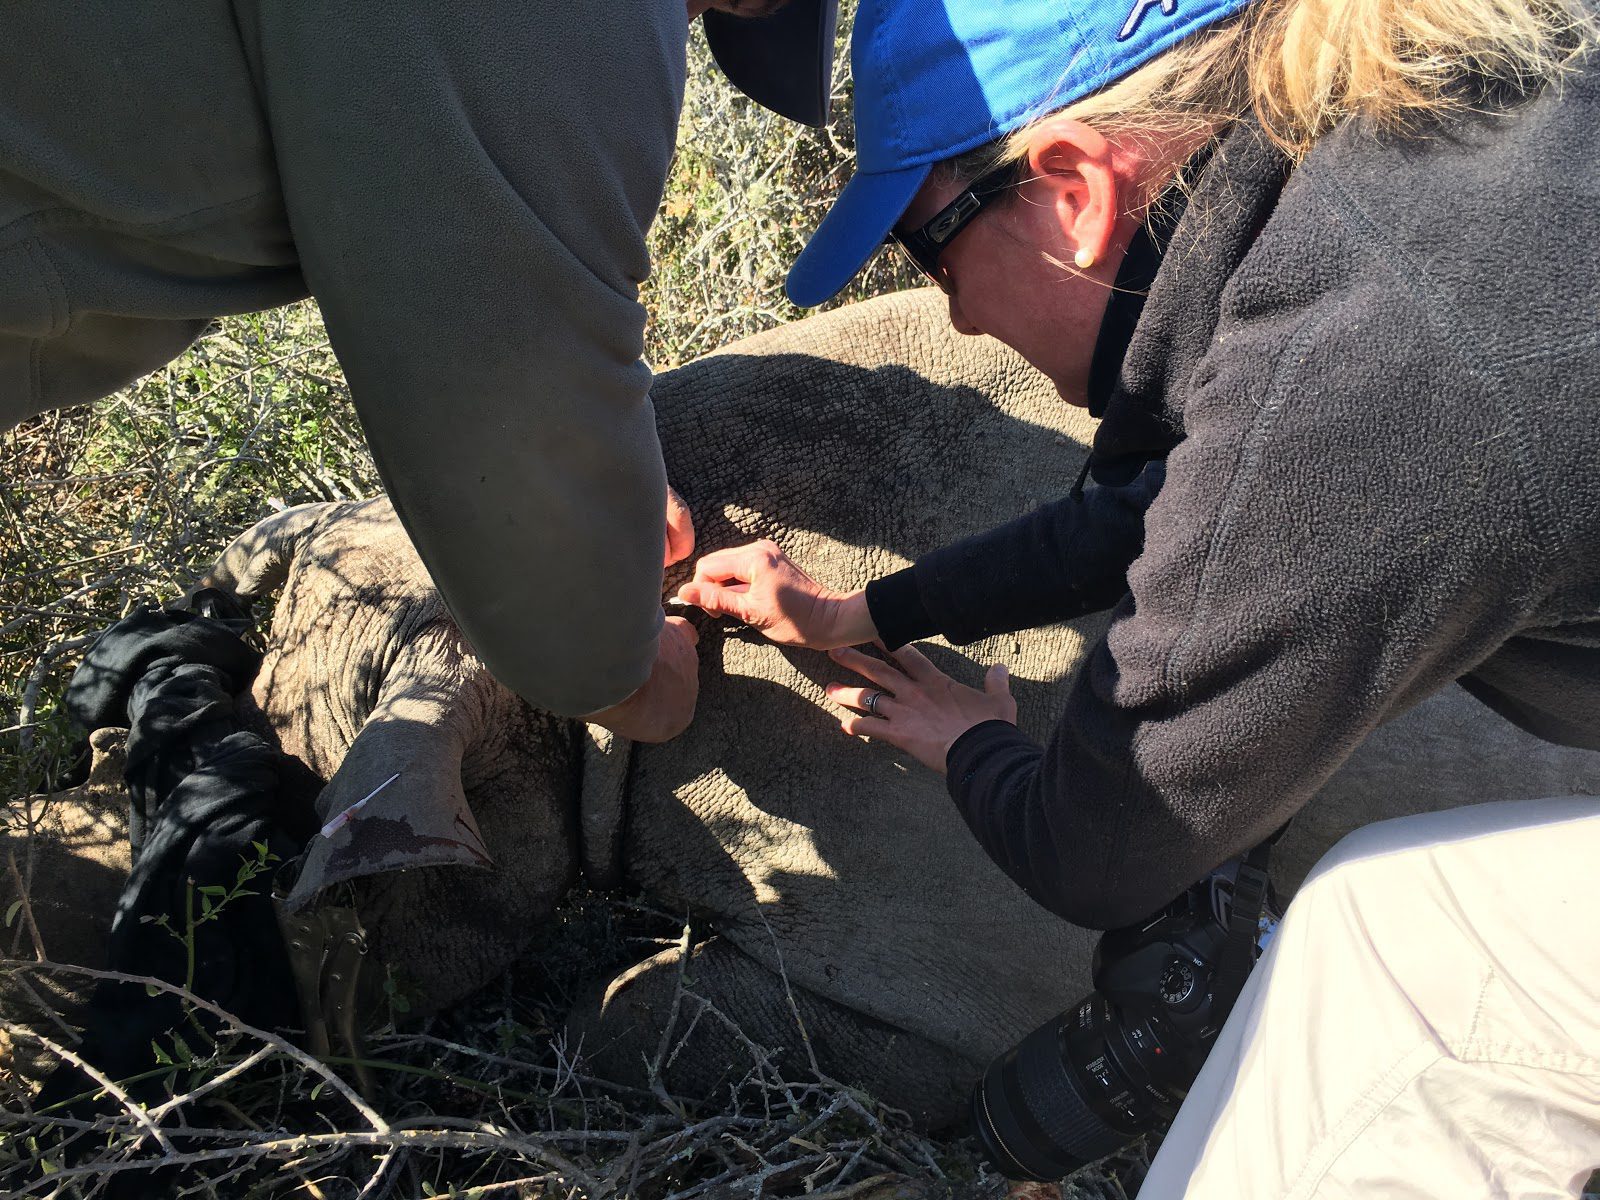 Do You Love Conservation? You Need to Monitor a Rhino on Safari